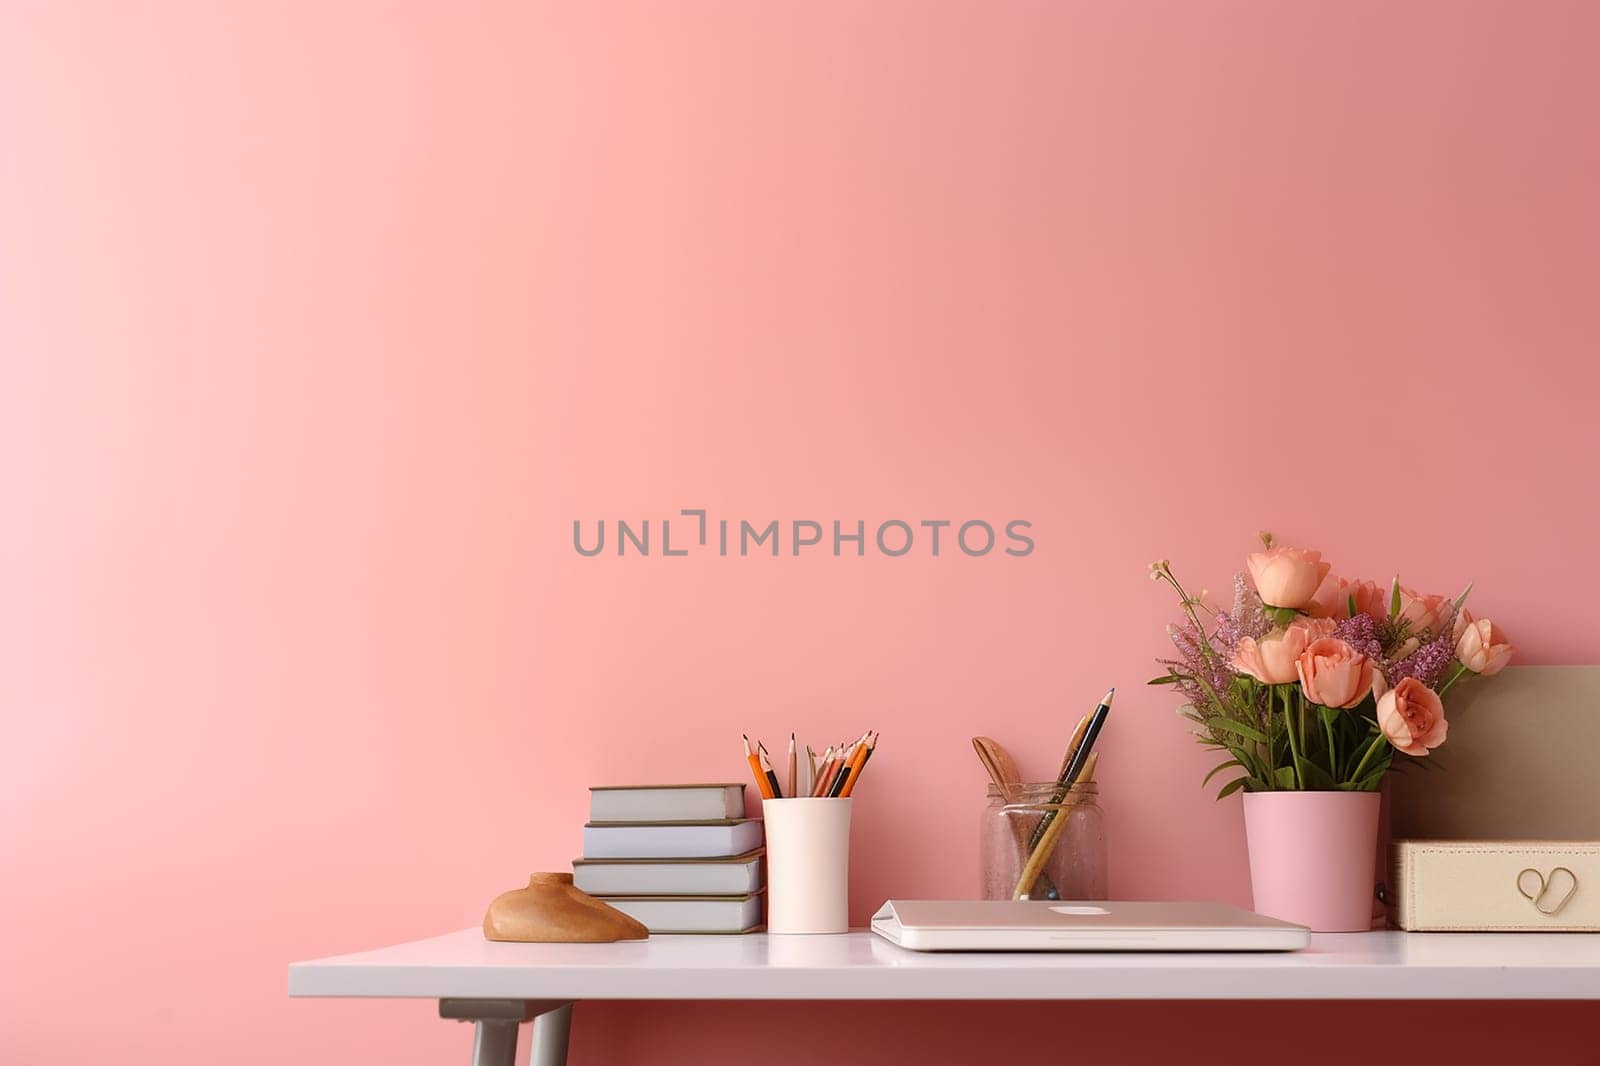 Modern workspace with books, flowers, and laptop on white desk against pastel pink background.